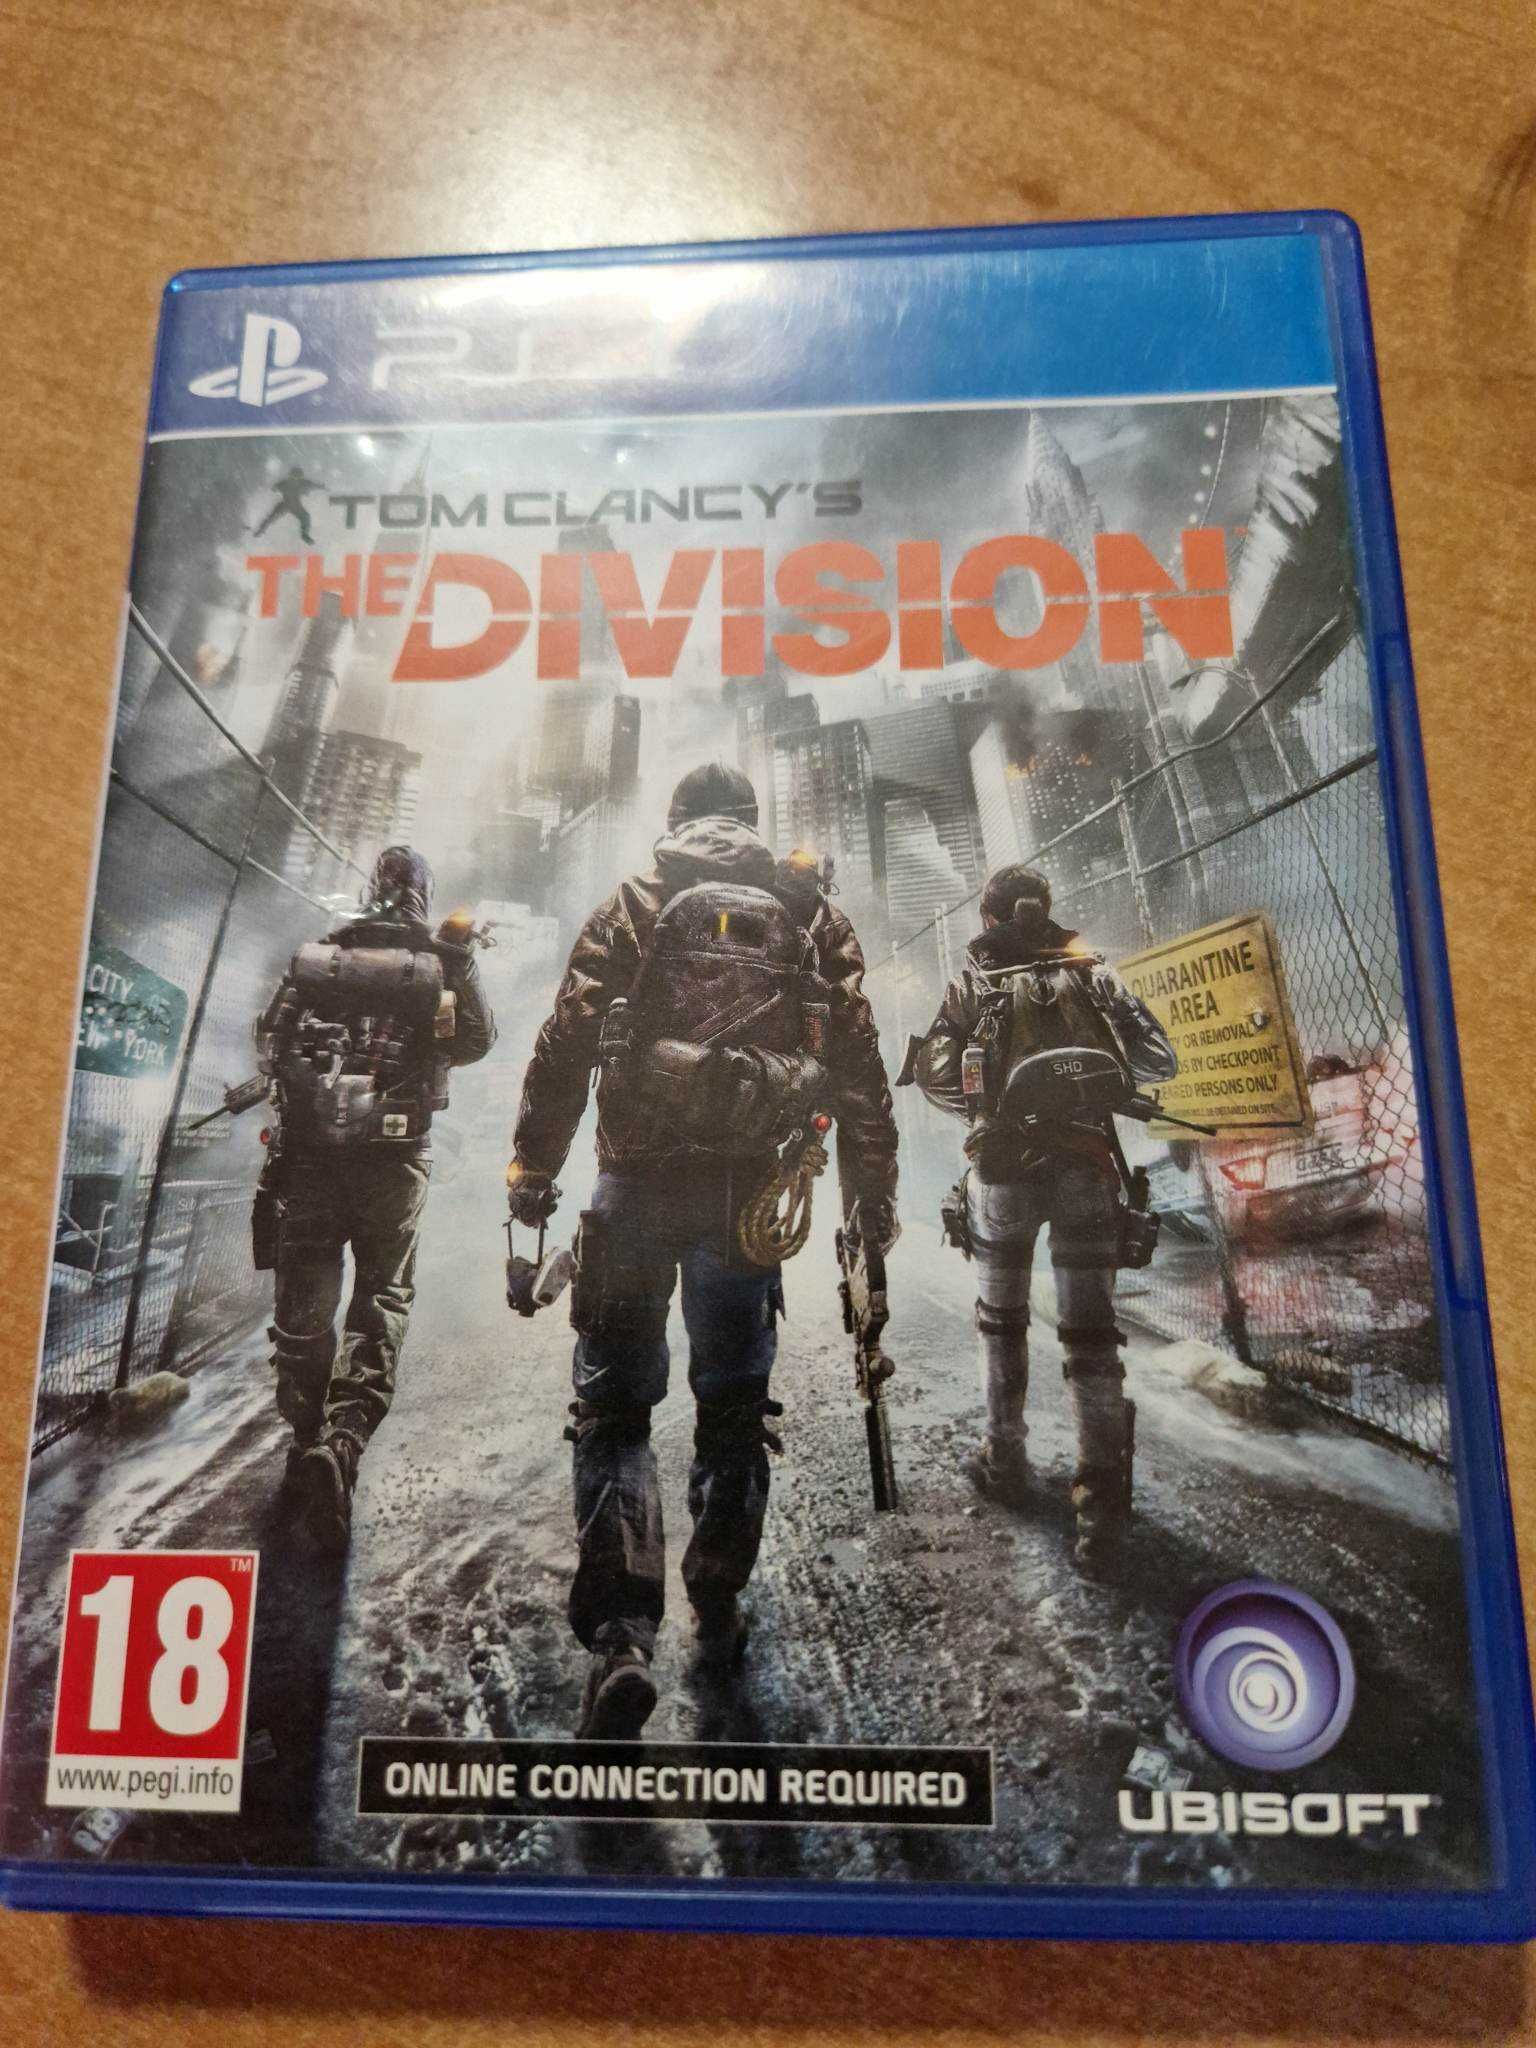 The Division PS4